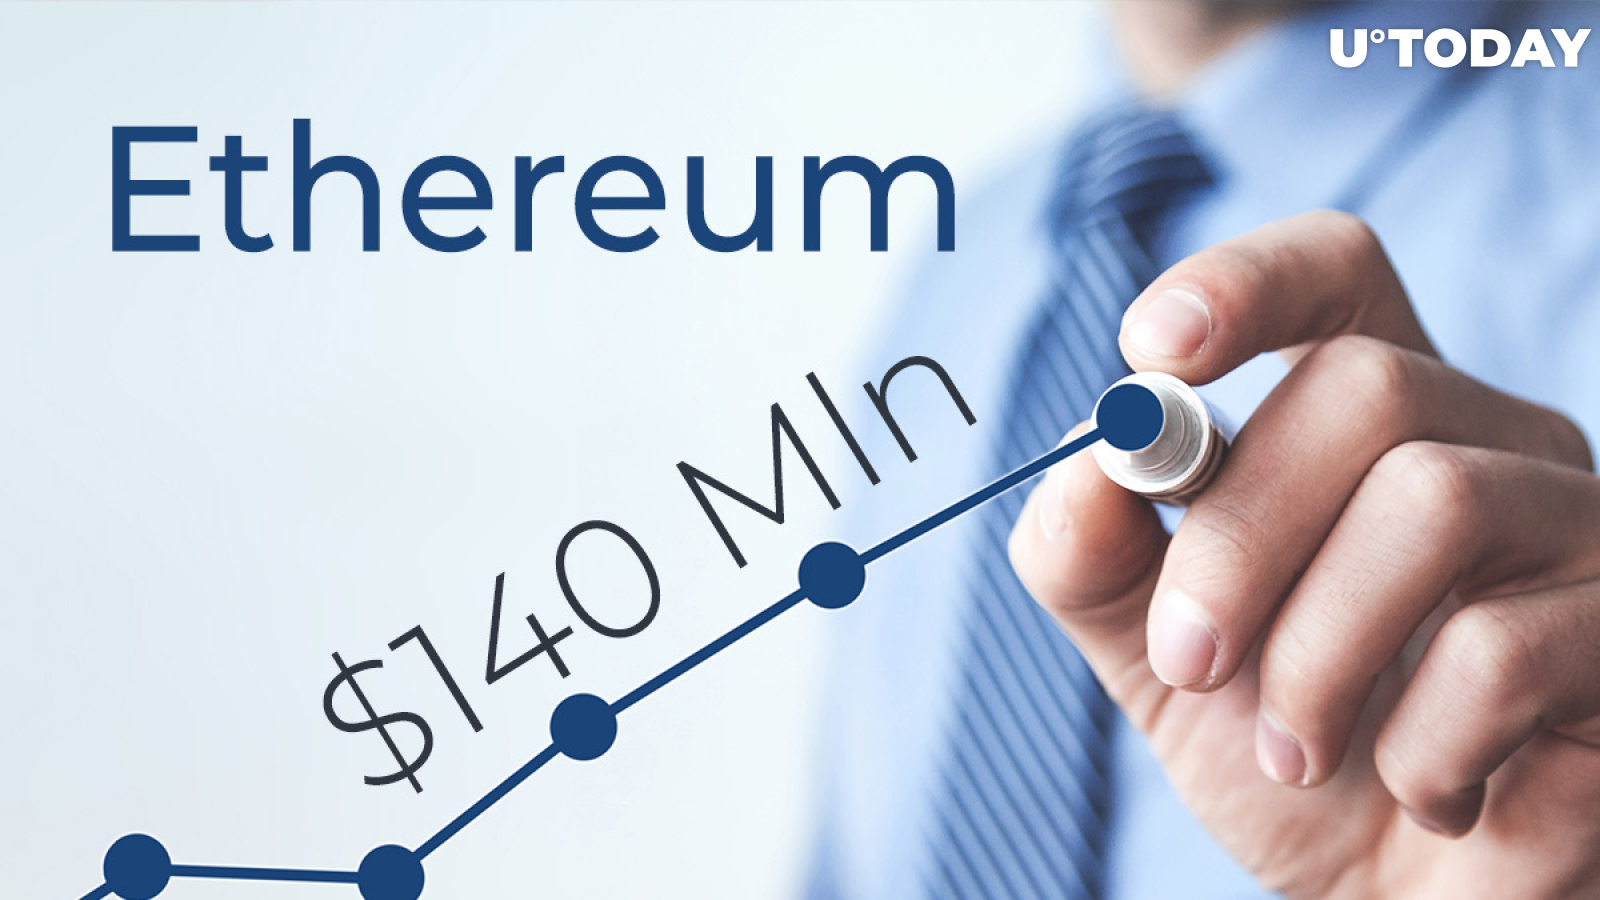 Ethereum Options Open Interest Surges to $140 Mln While BTC OI Holds Over $1 Bln on Deribit